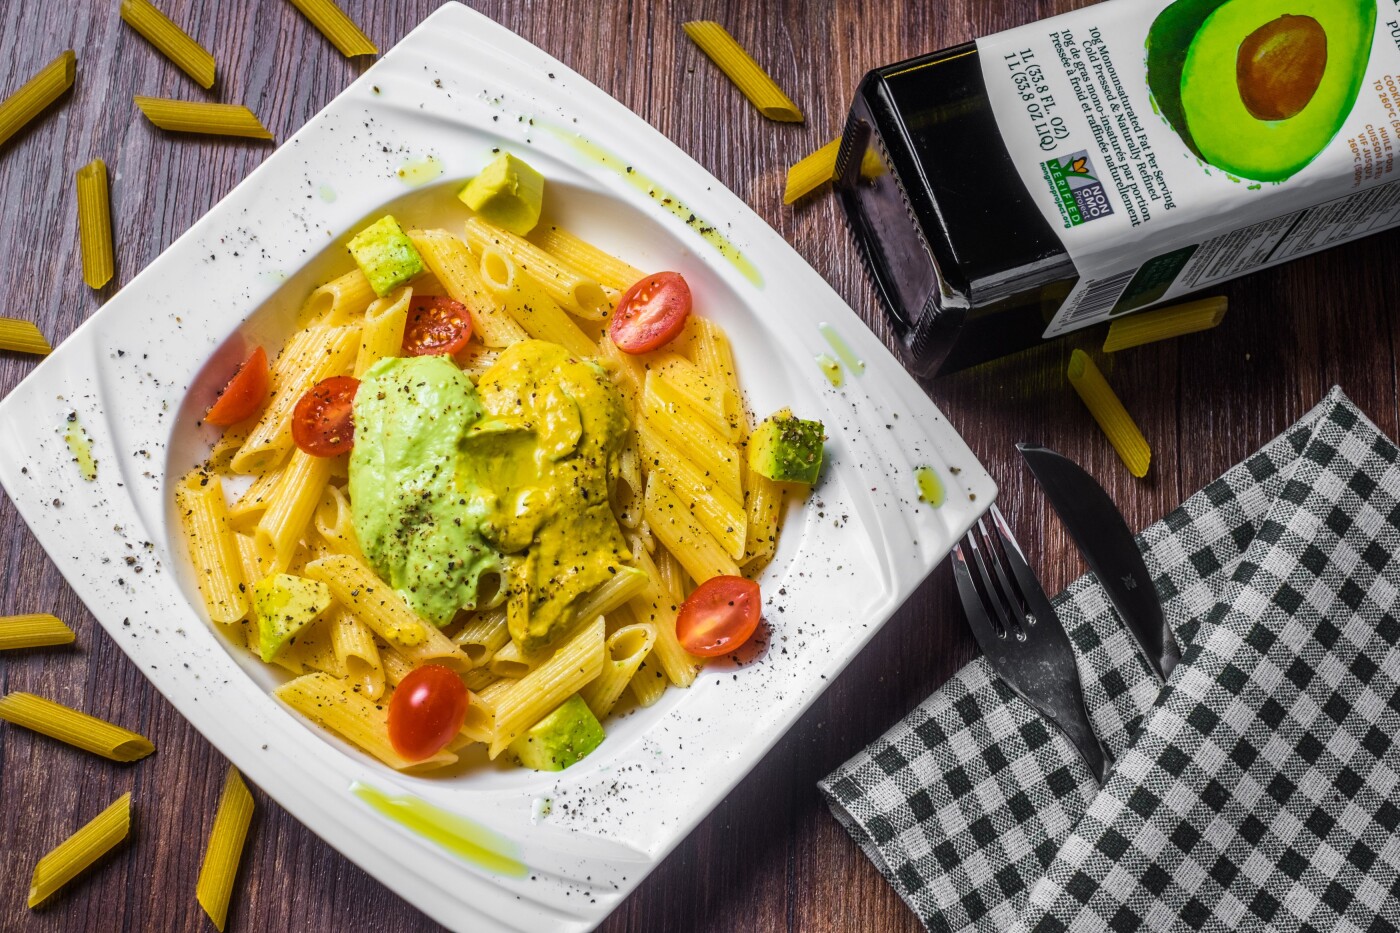 Time to miss summer and the fresh taste already: avocado, tomato, basil and yogurt never go wrong!<br />
<br />
Dressing: freshly meshed avocado with greek yogurt<br />
Pasta: Italian Gluten-free Penne